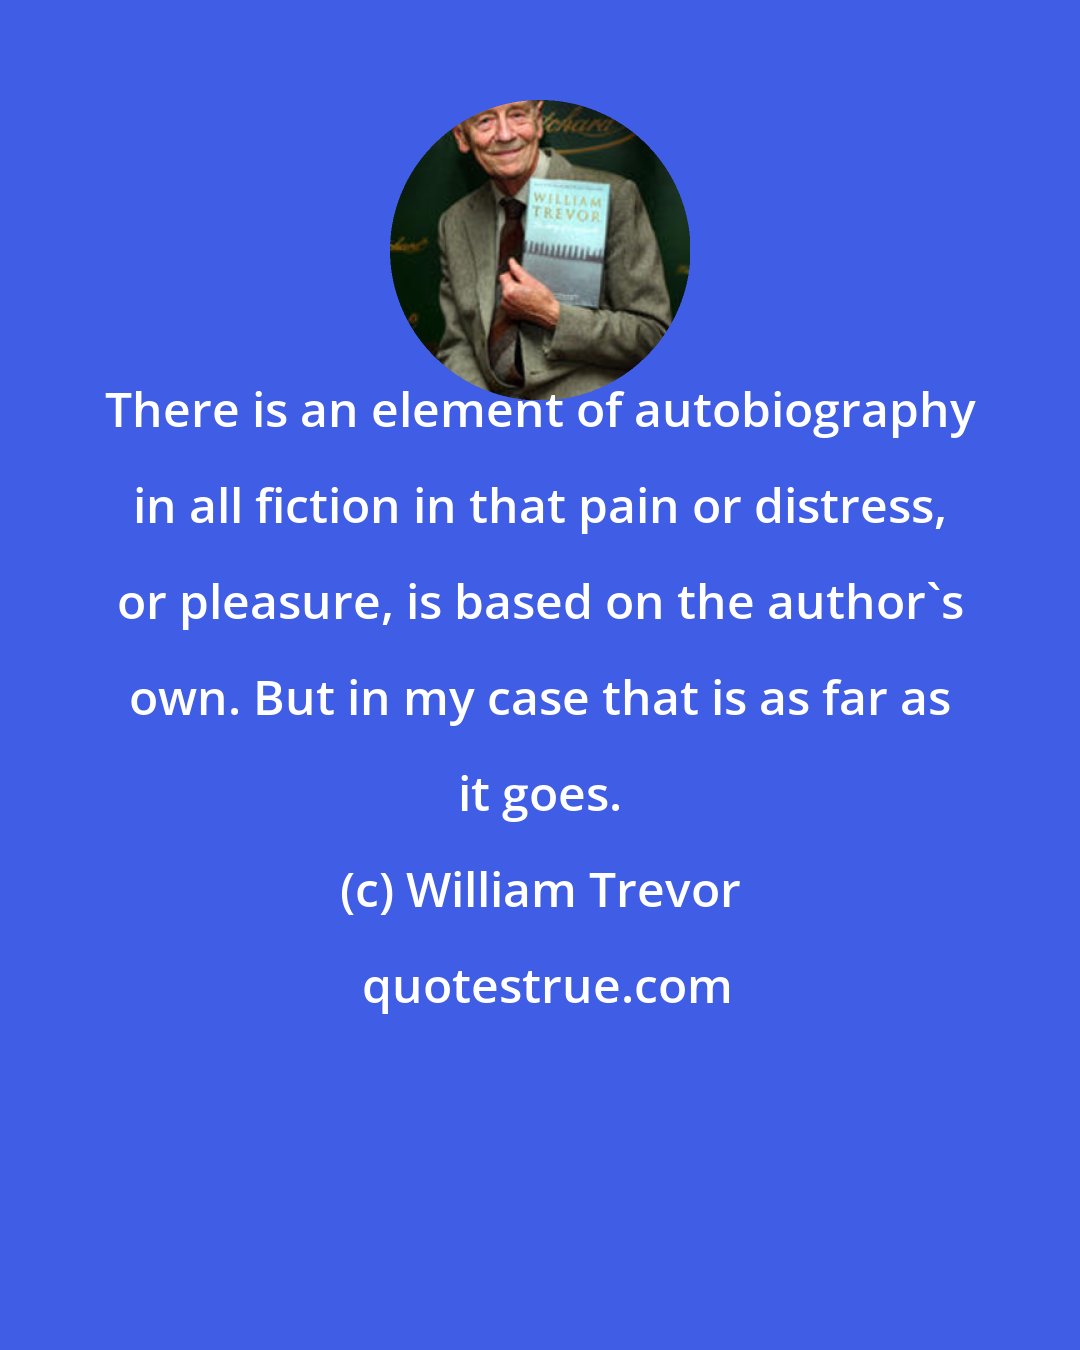 William Trevor: There is an element of autobiography in all fiction in that pain or distress, or pleasure, is based on the author's own. But in my case that is as far as it goes.